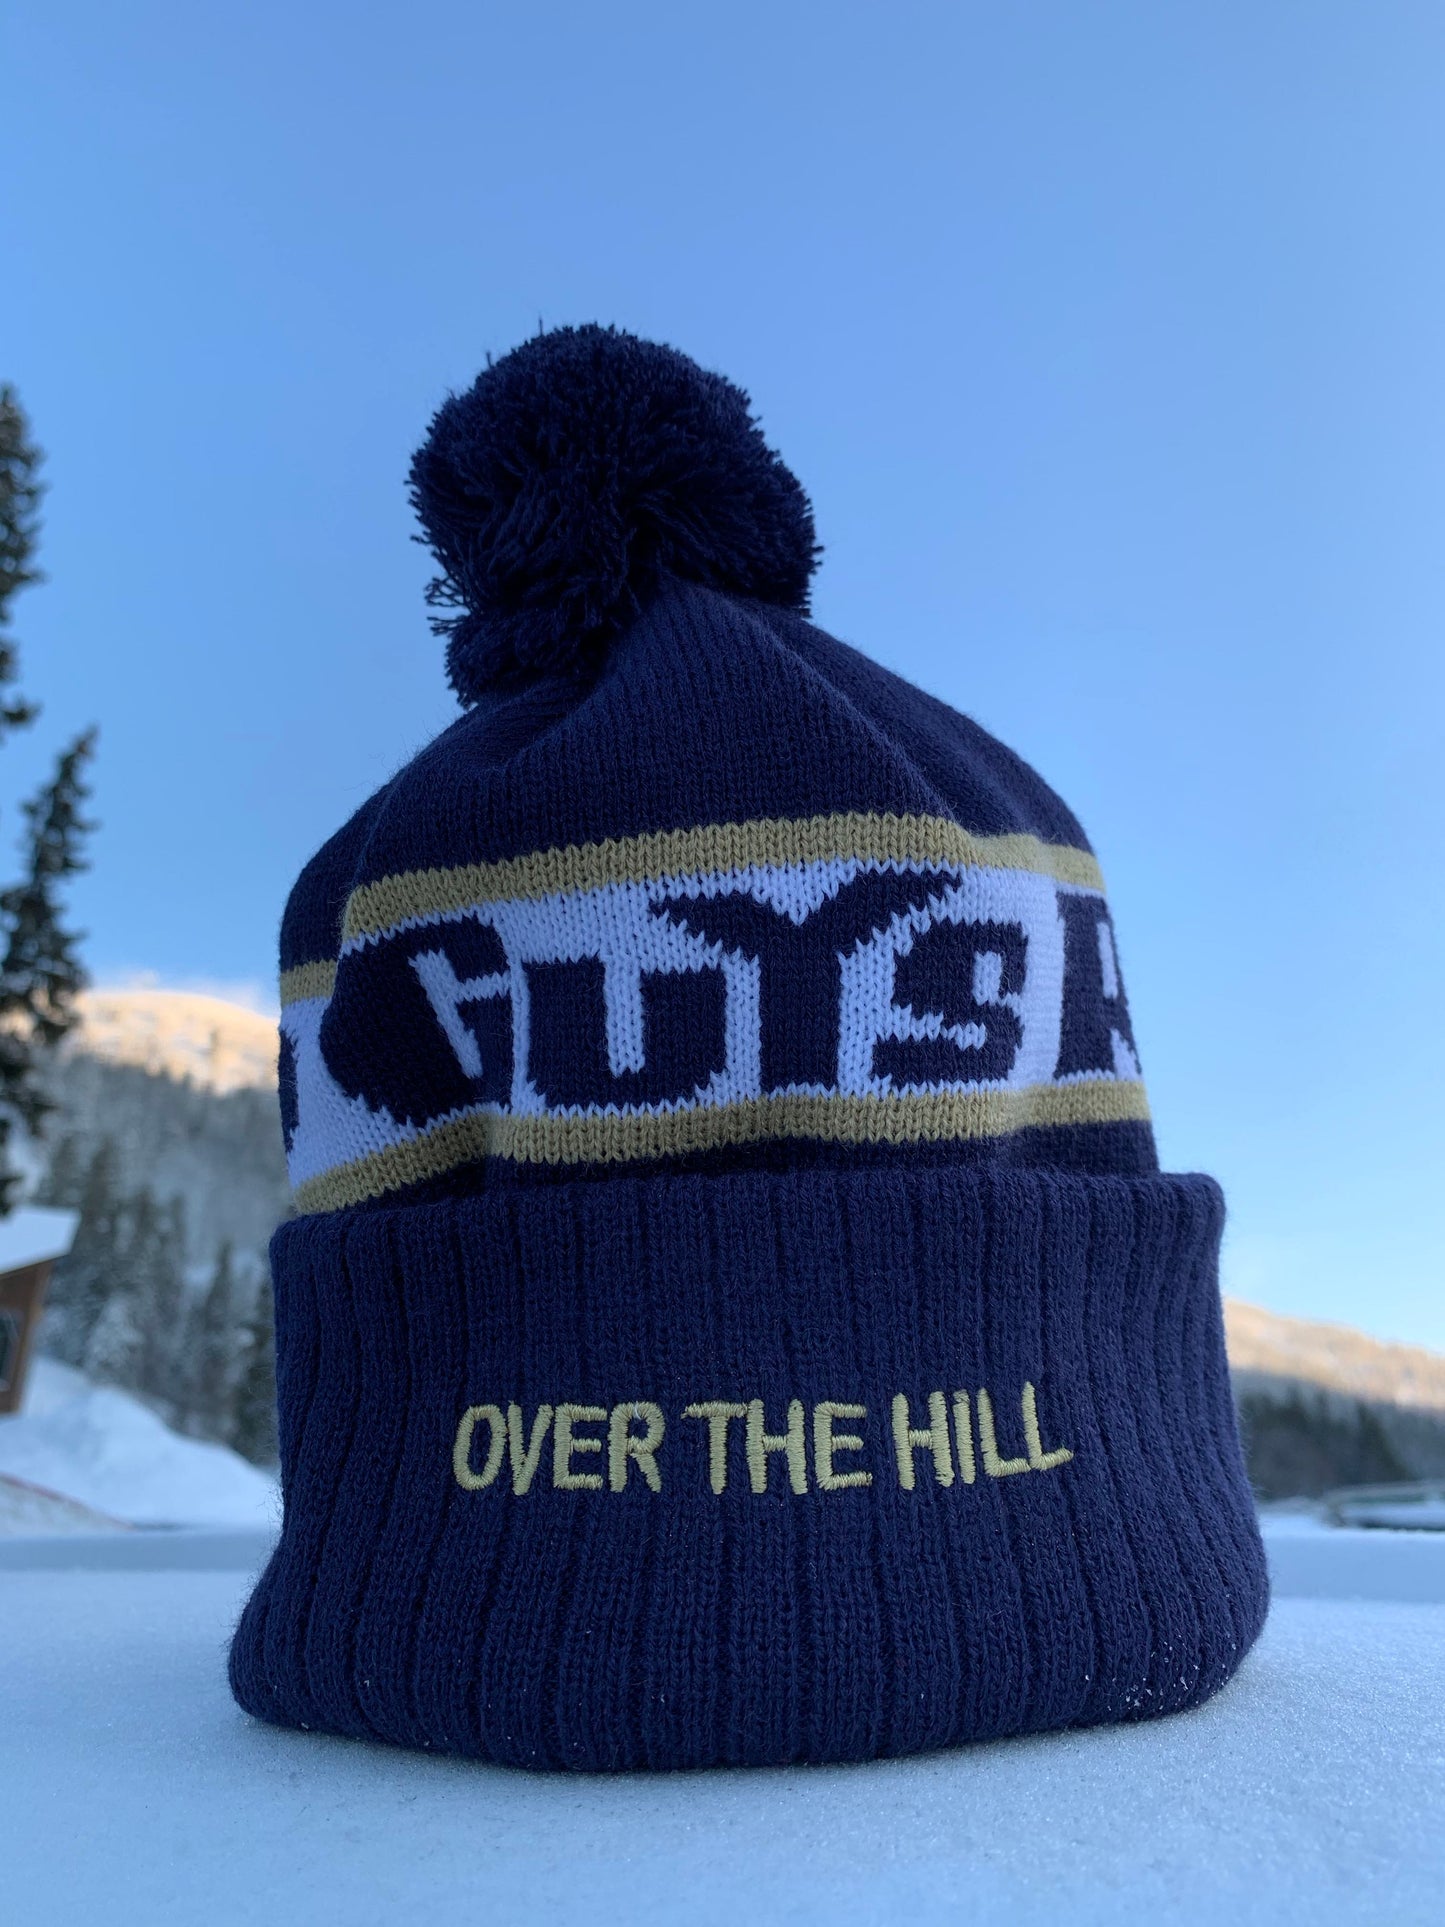 OLD GUYS RULE - OVER THE HILL